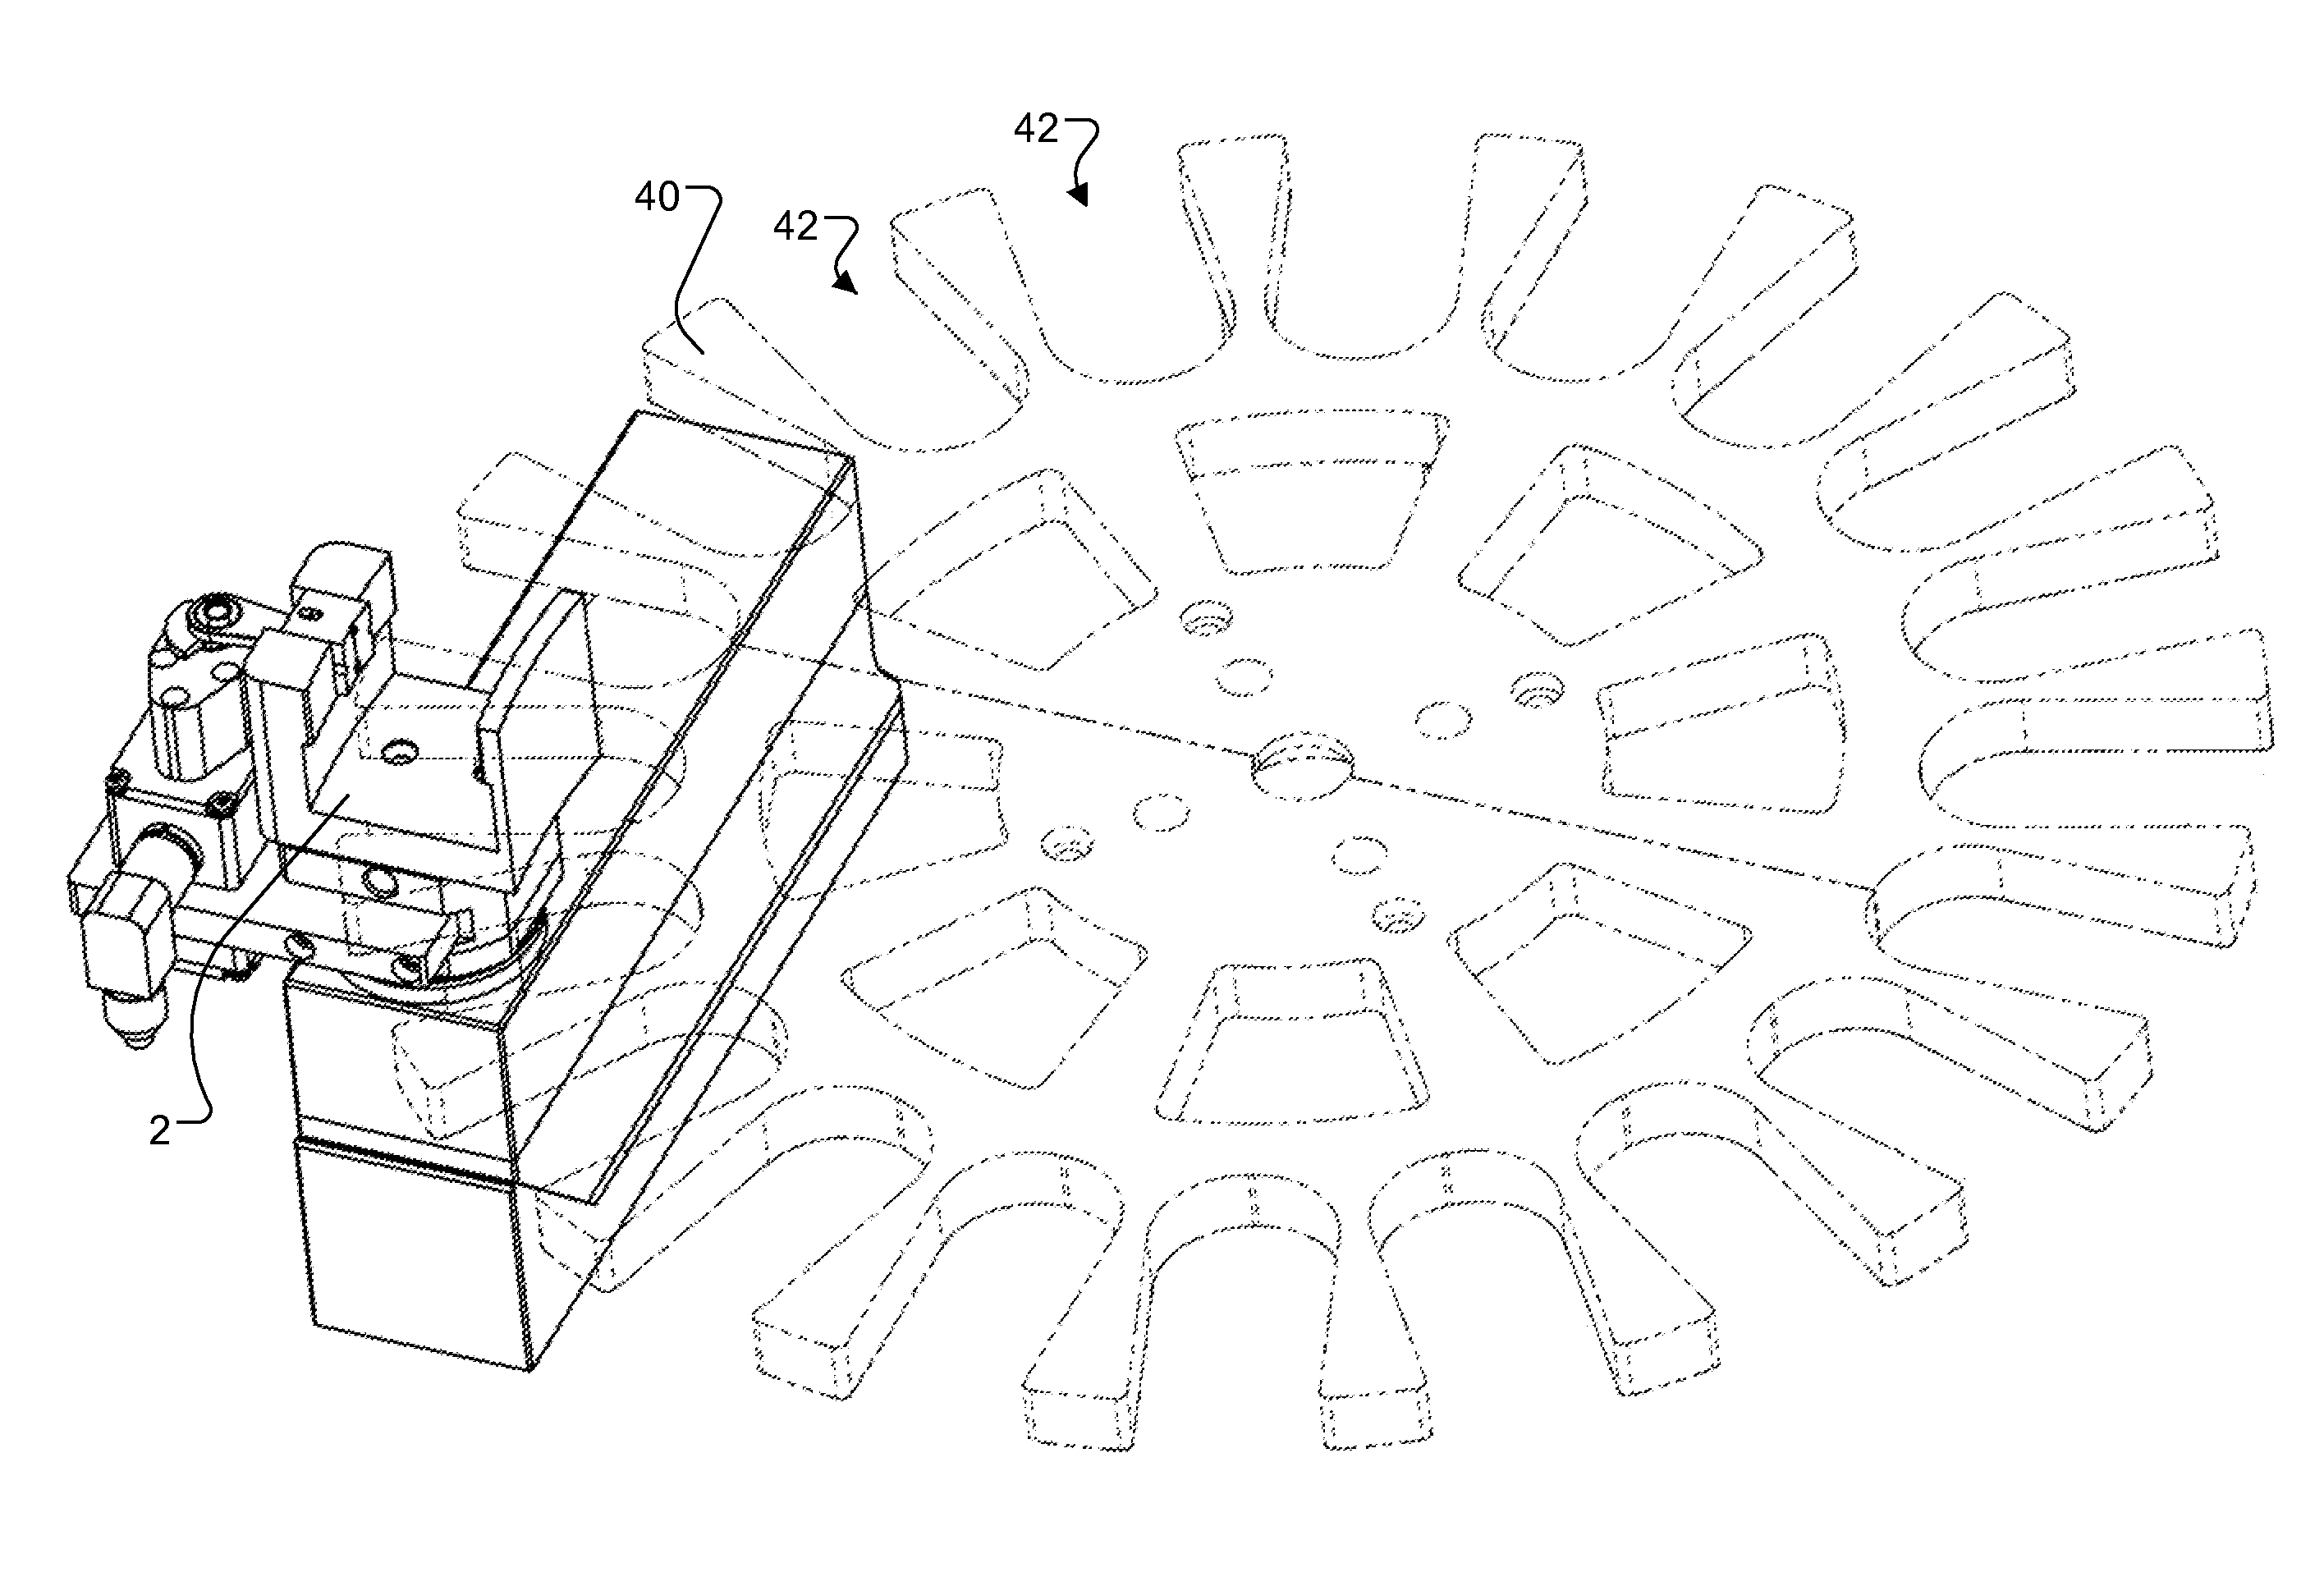 Weighing system including a preload weighing table and clamping device for weighing sequentially fed items